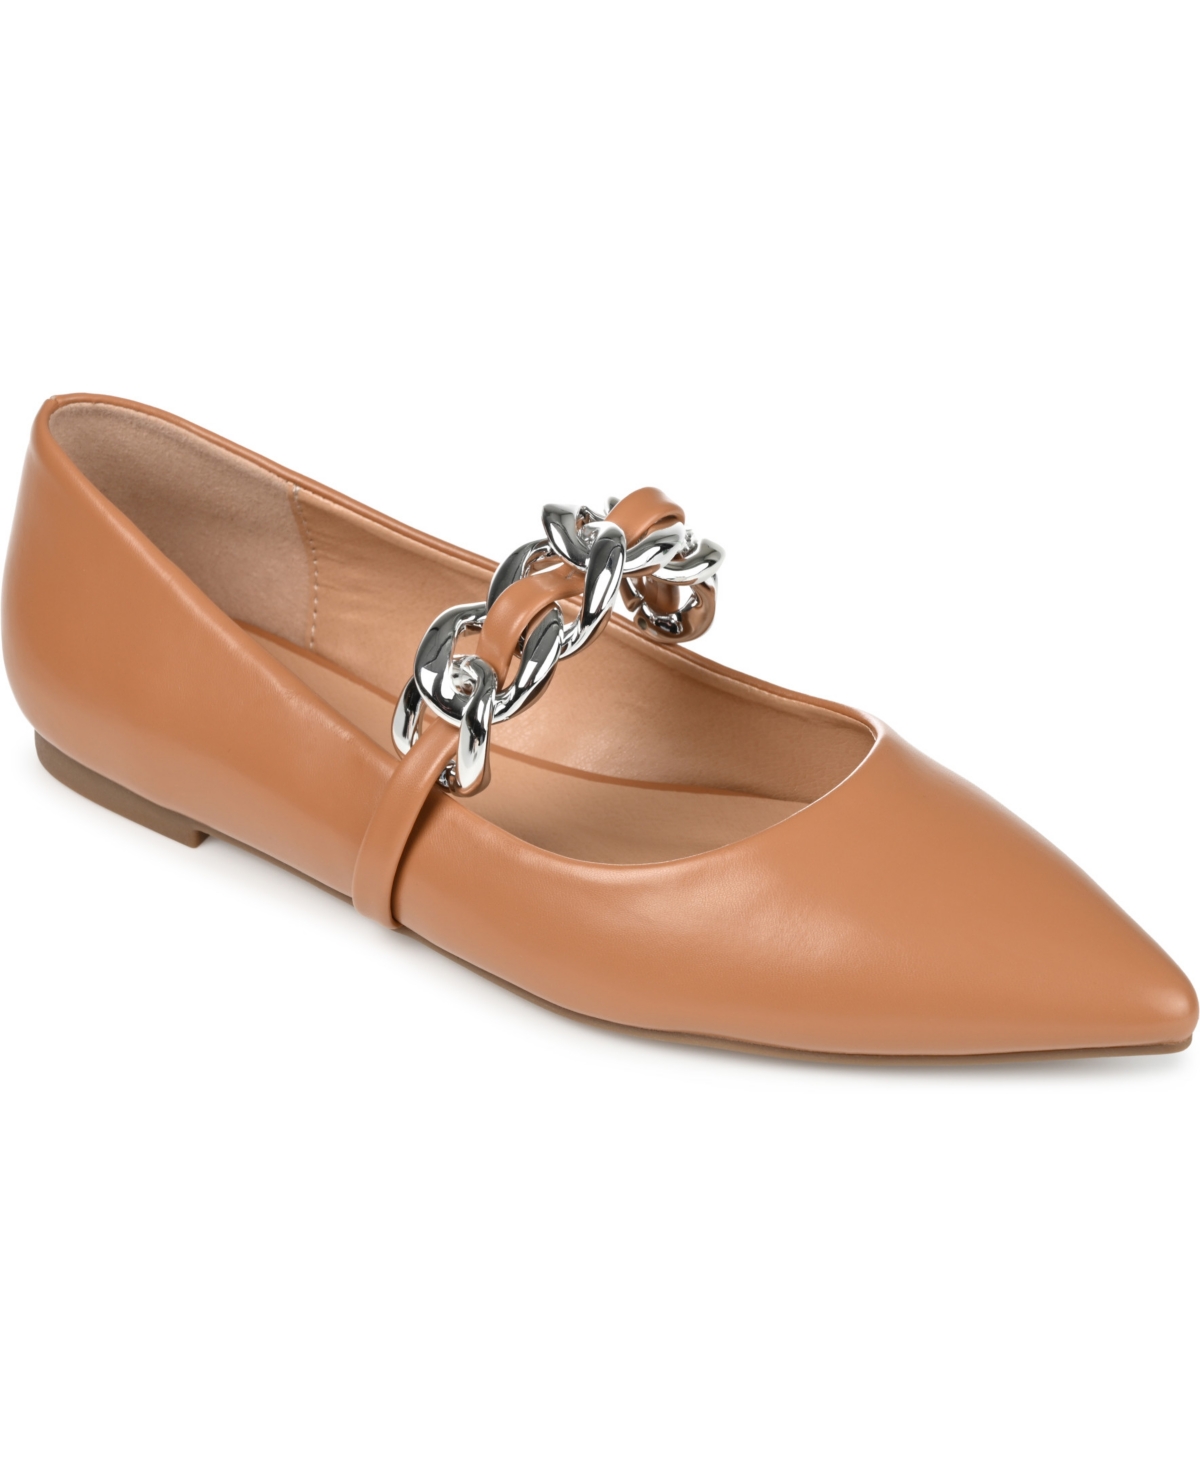 JOURNEE COLLECTION WOMEN'S METINAA CHAIN MARY JANE POINTED TOE FLATS